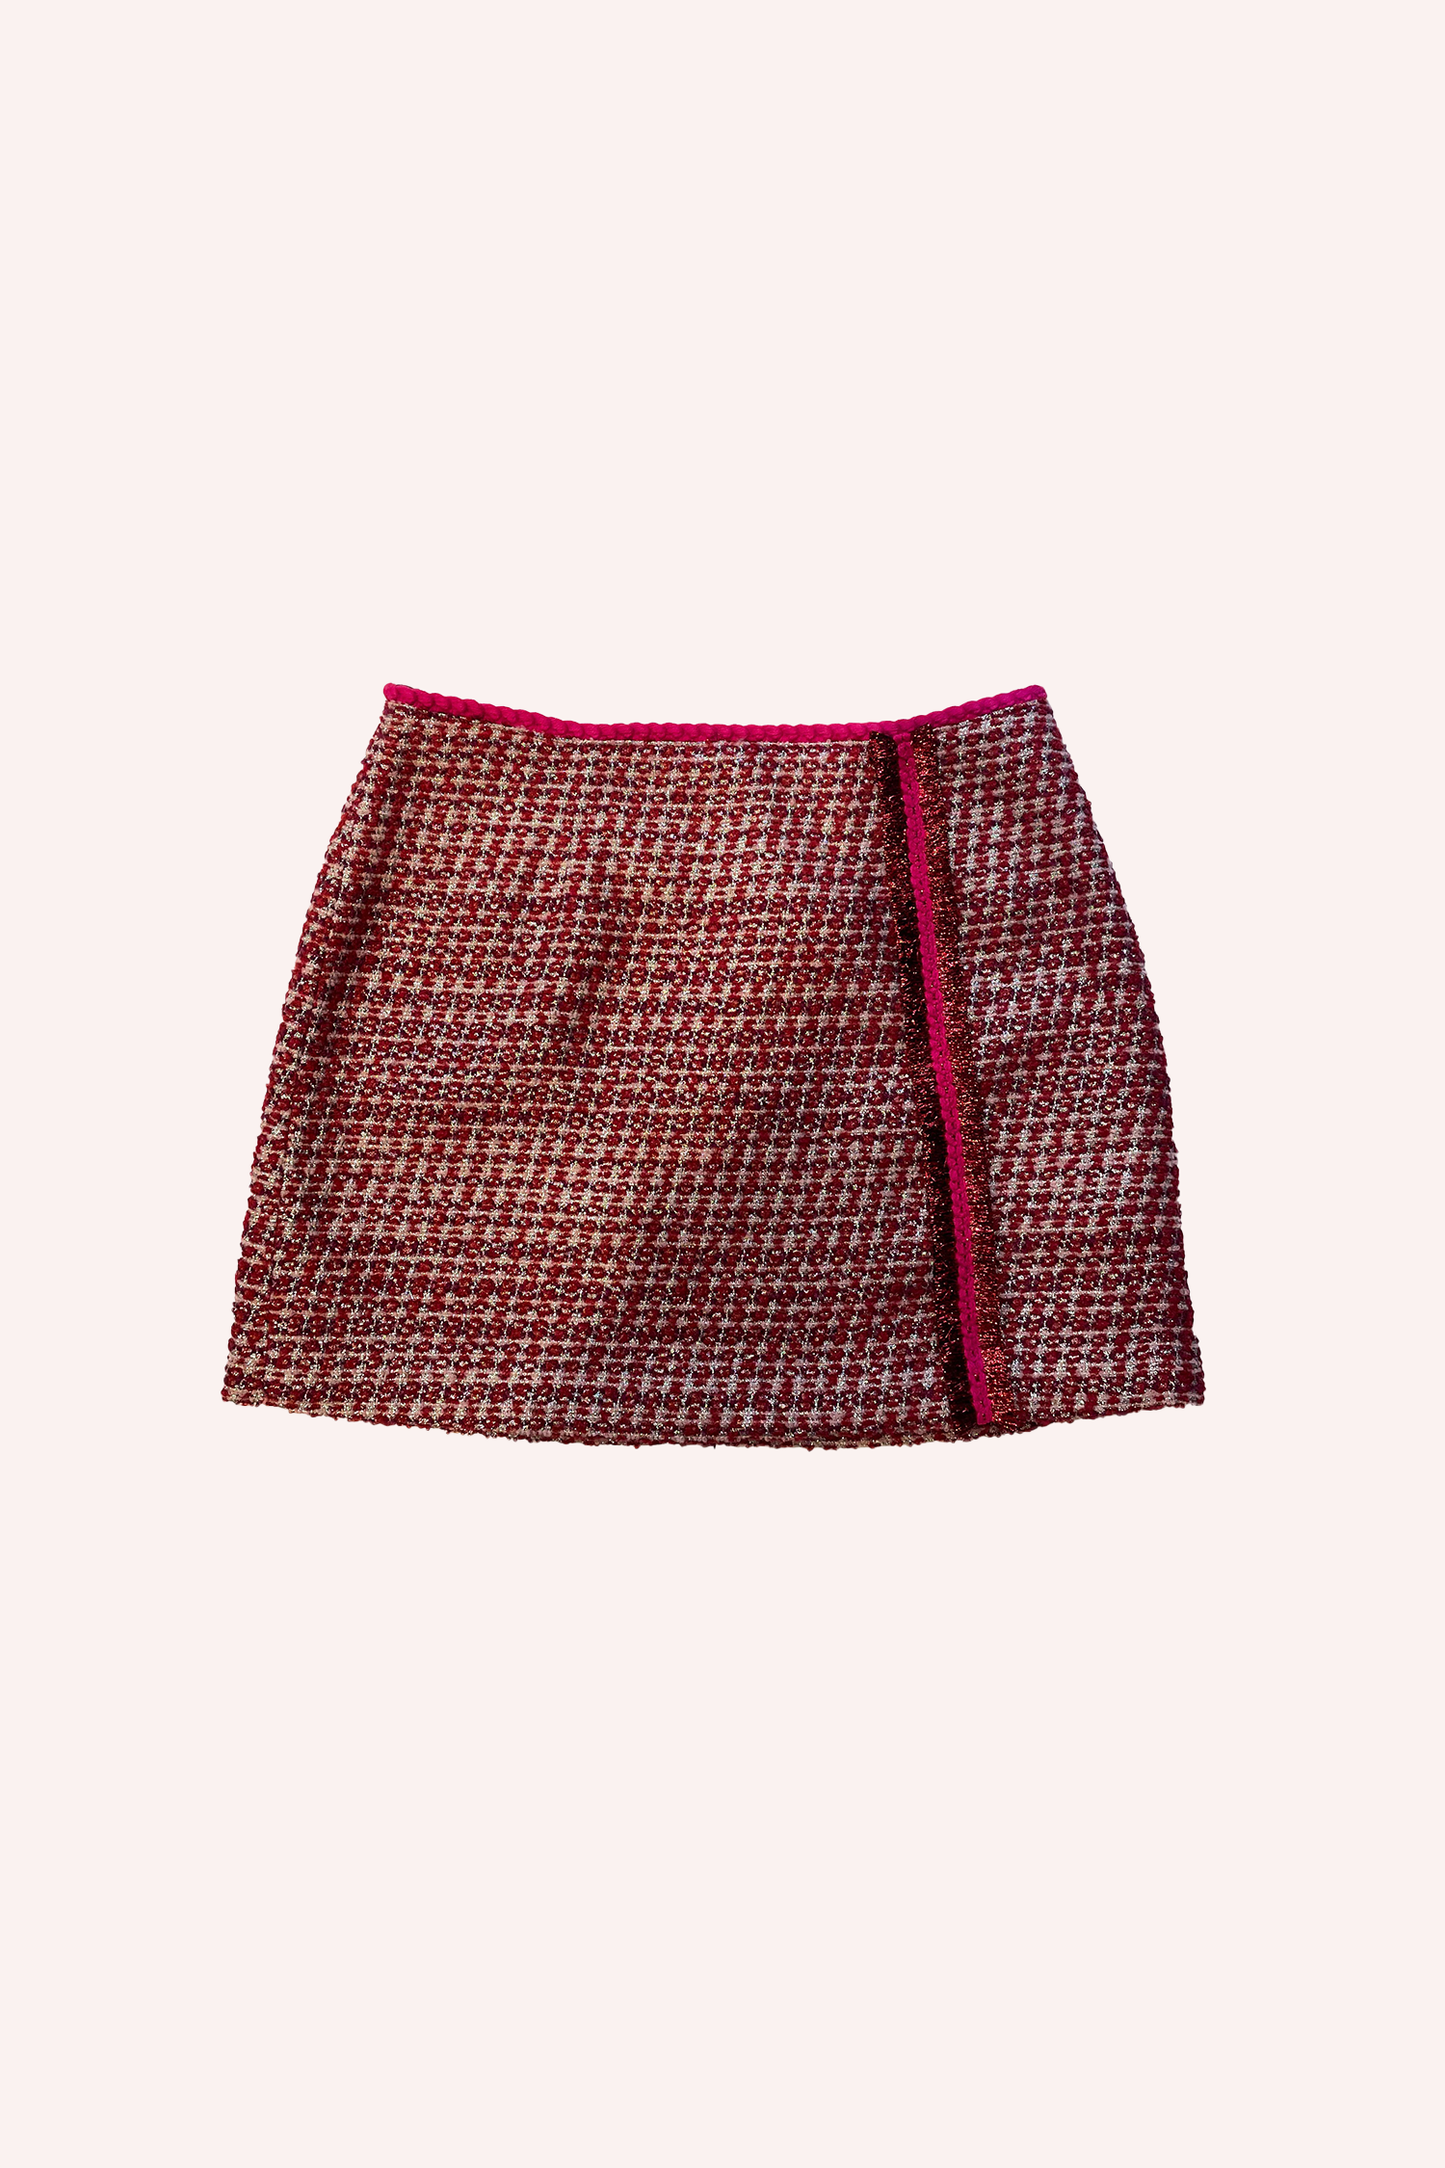 This ruby-colored, tweed mini-skirt, a red highlight at the top hem and on the left side, goes from the top to the hips